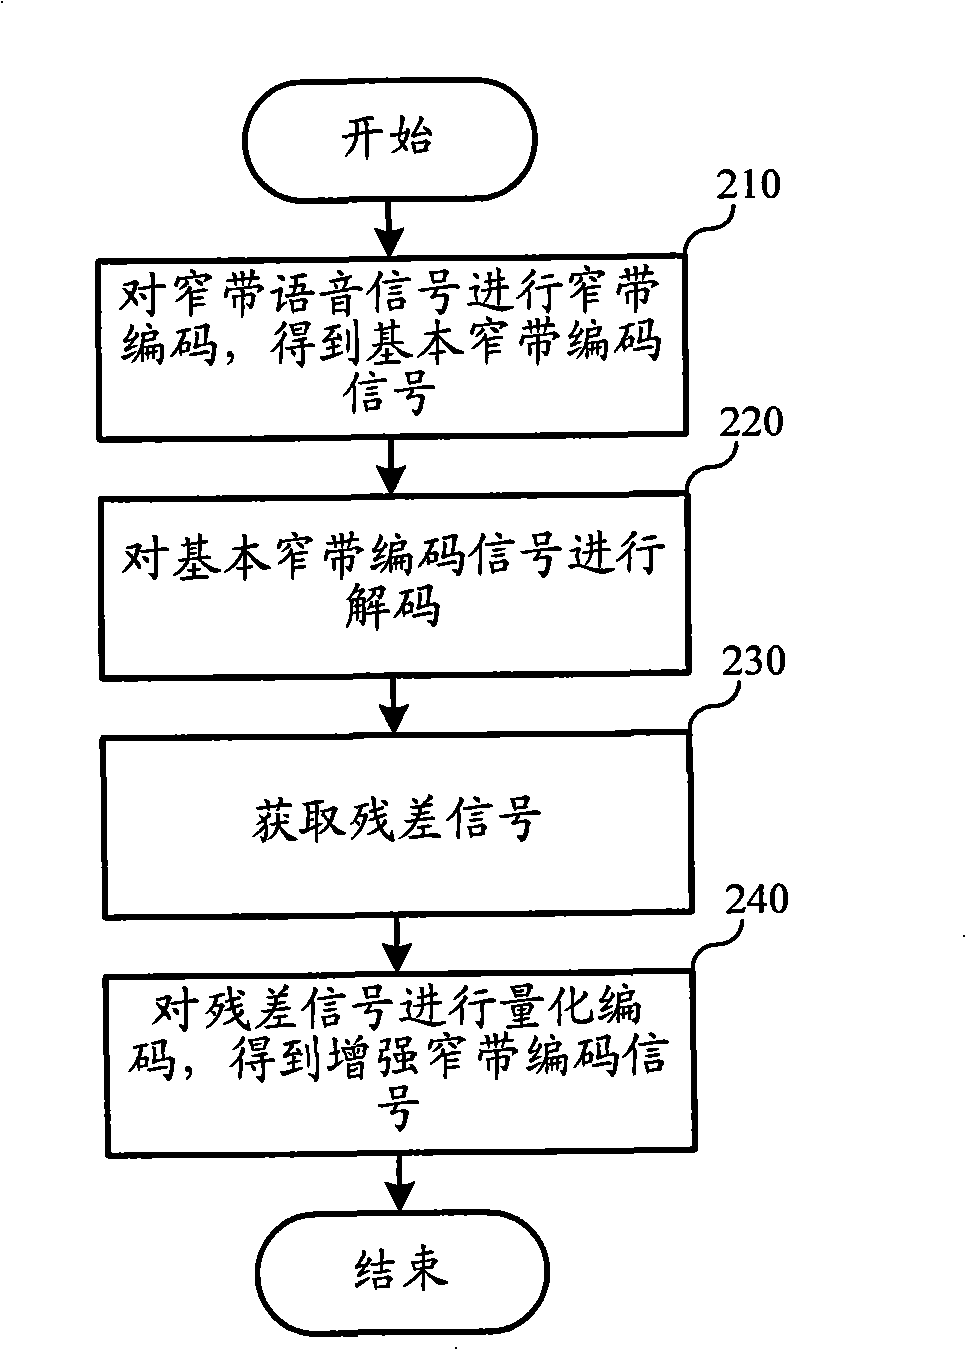 Method and apparatus for transmitting and receiving encoding-decoding speech